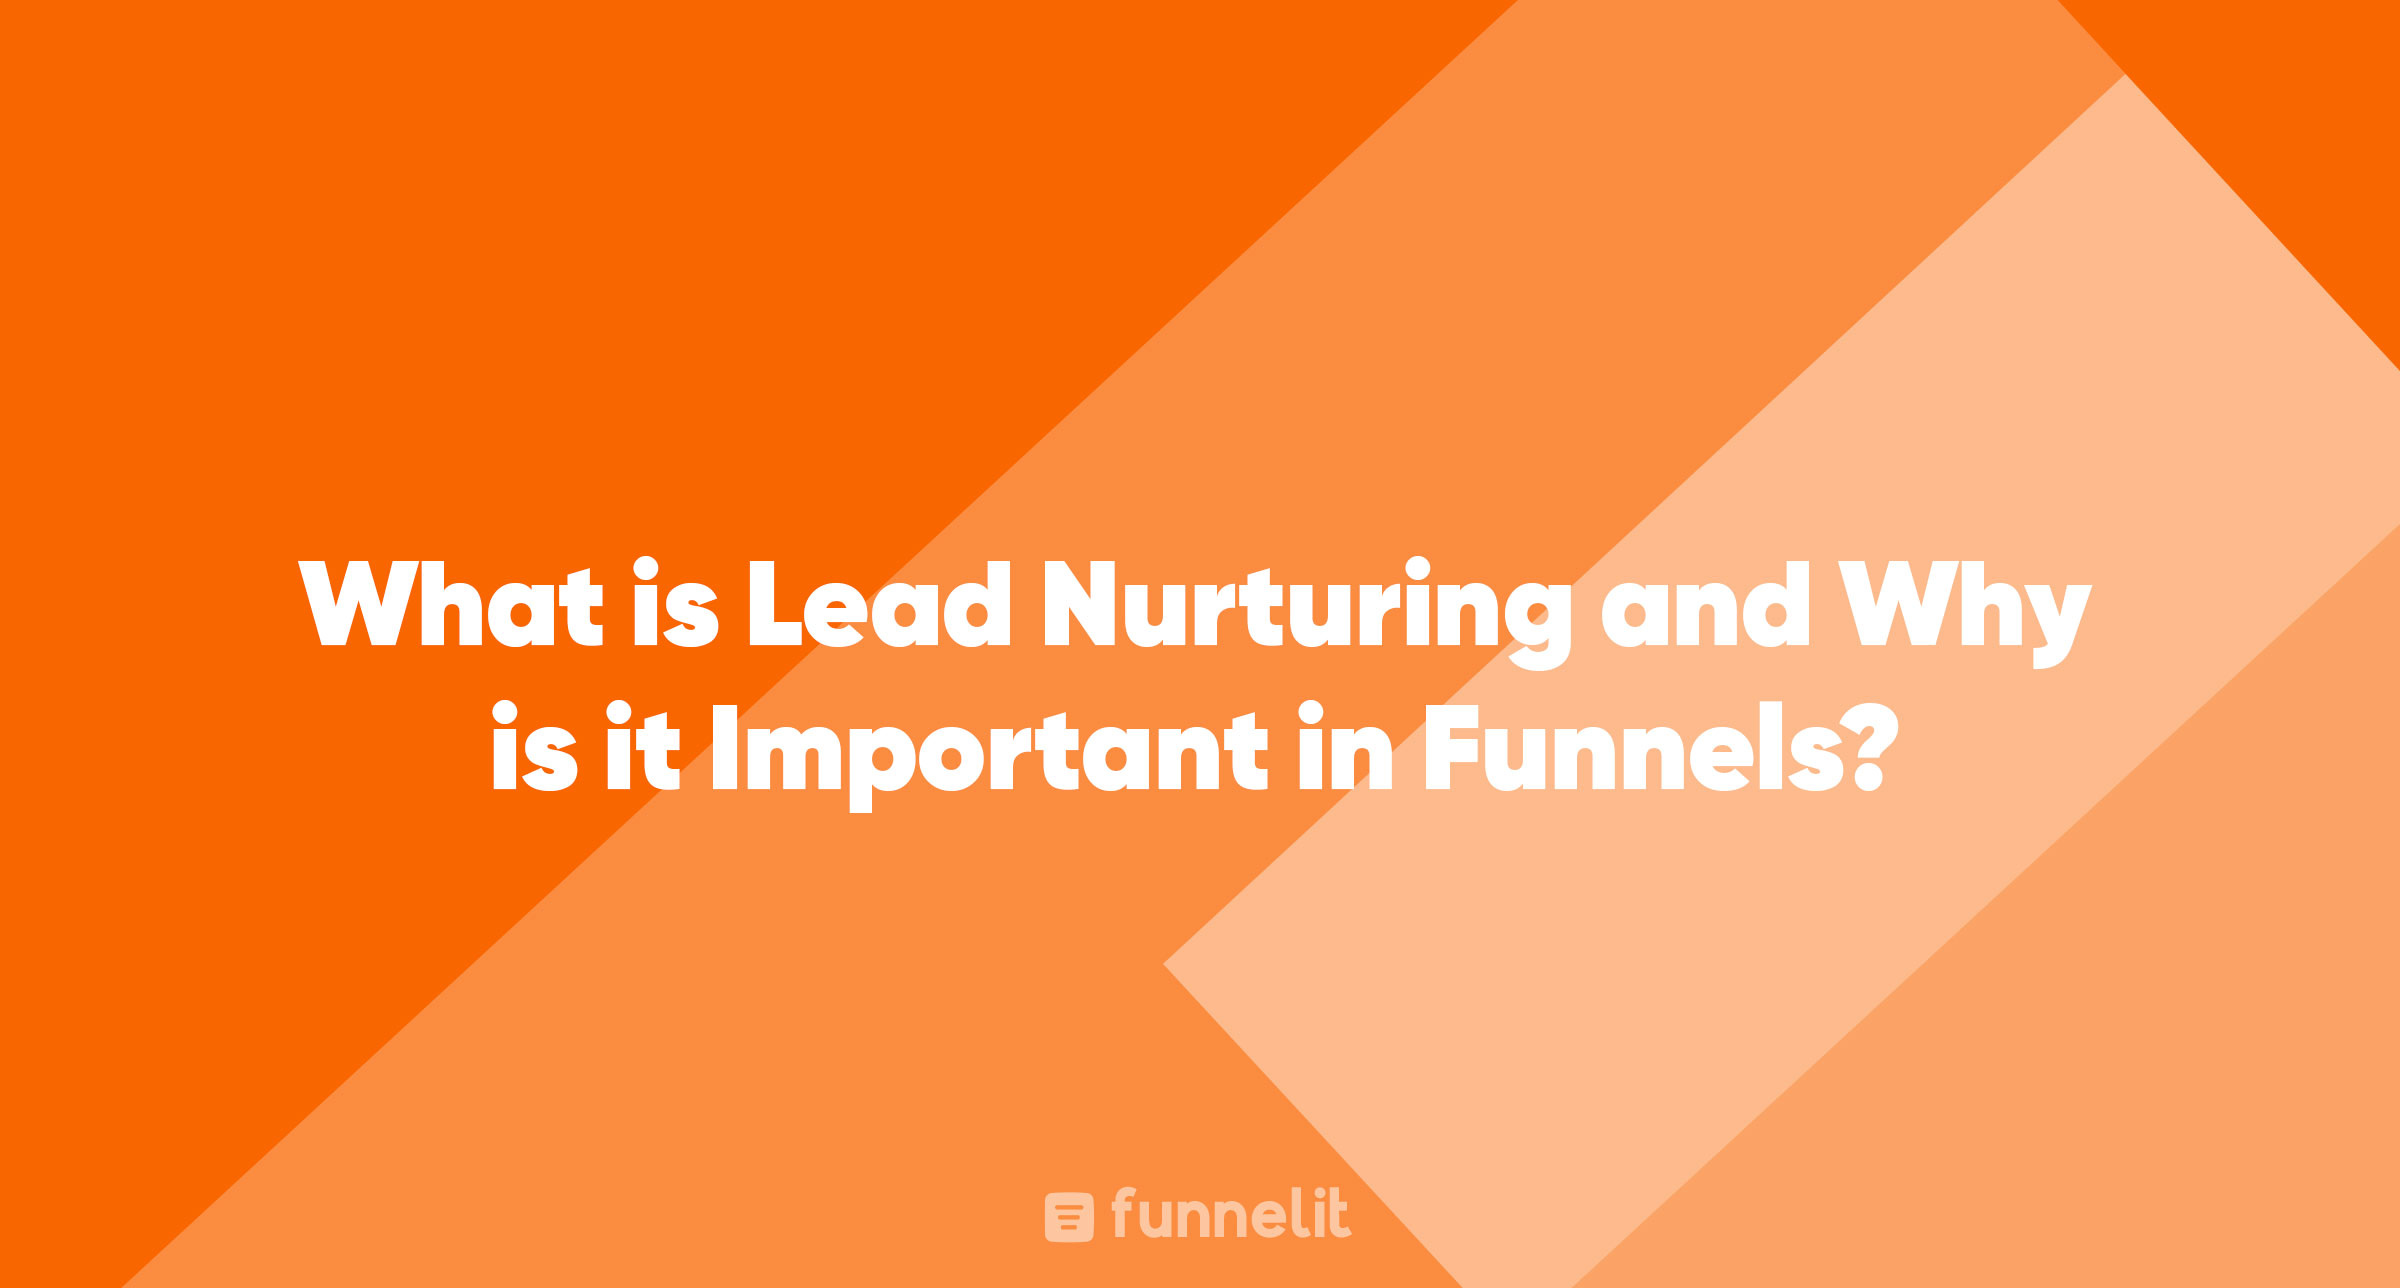 Article | What is Lead Nurturing and Why is it Important in Funnels?